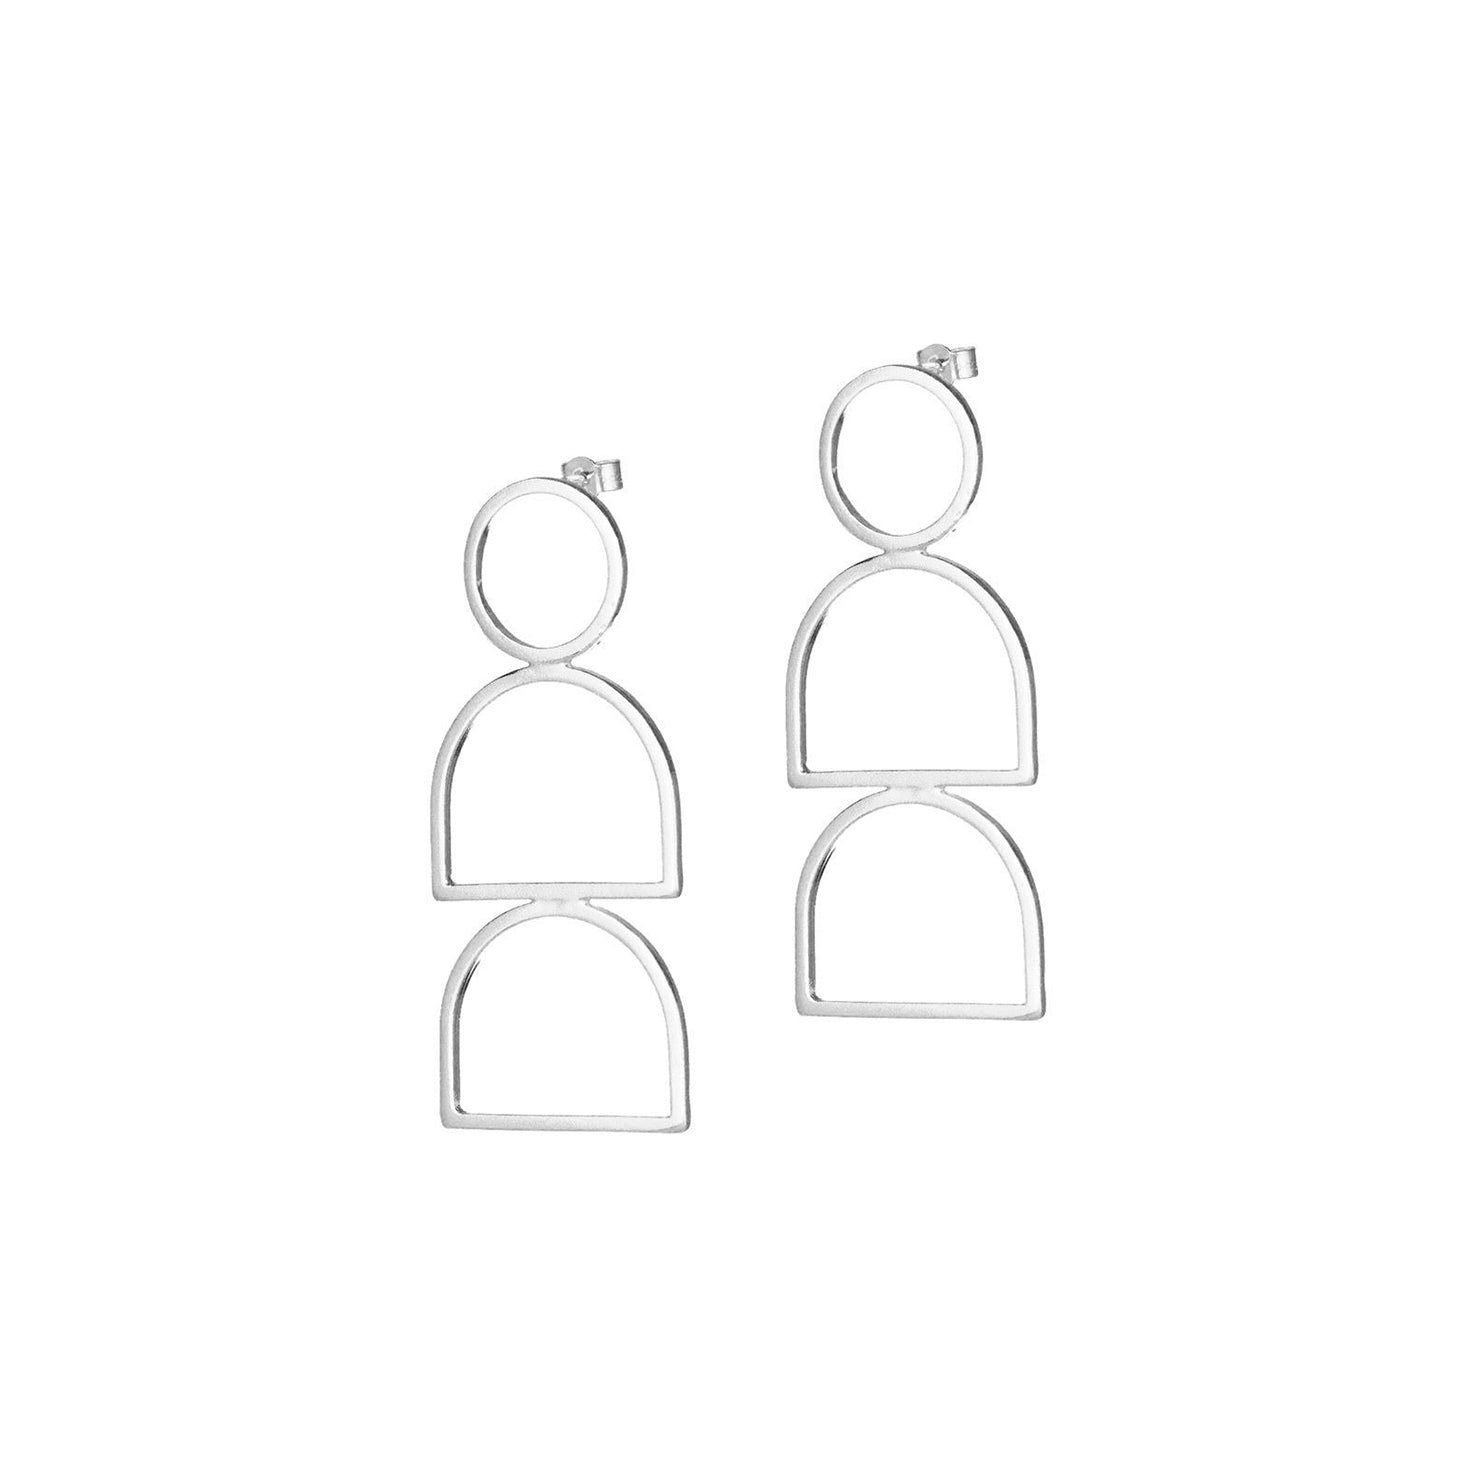 Nancy Earrings Made From Recycled Silver